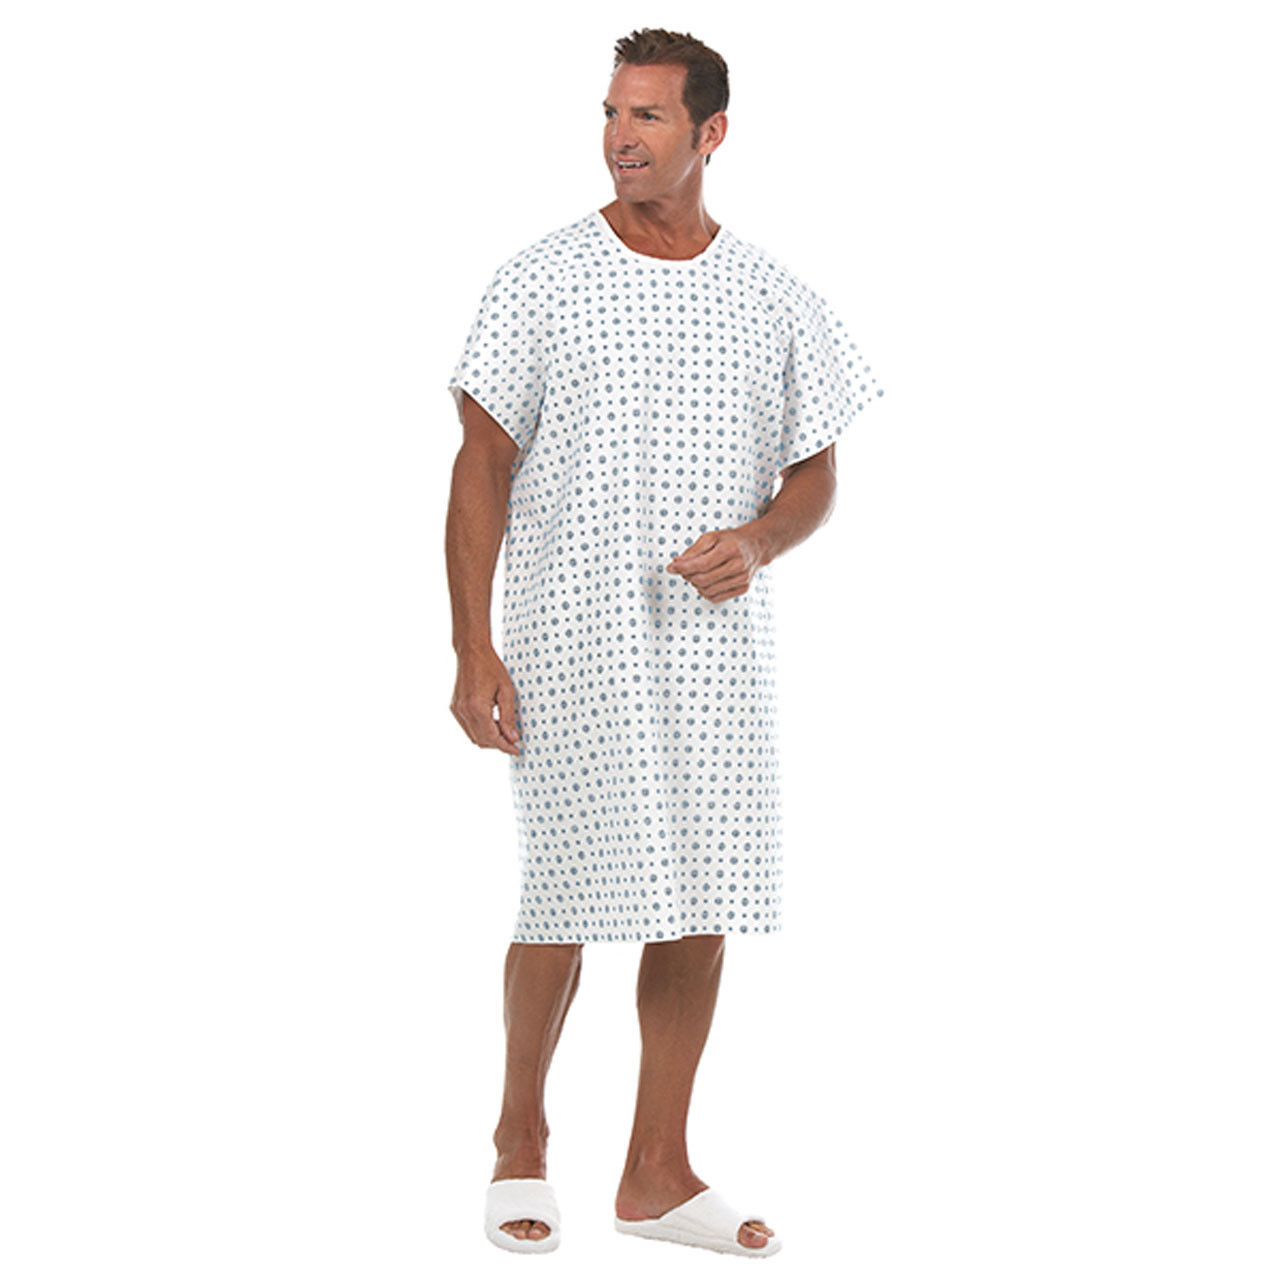 Where can I find the cheapest surgical gown bulk quantities?